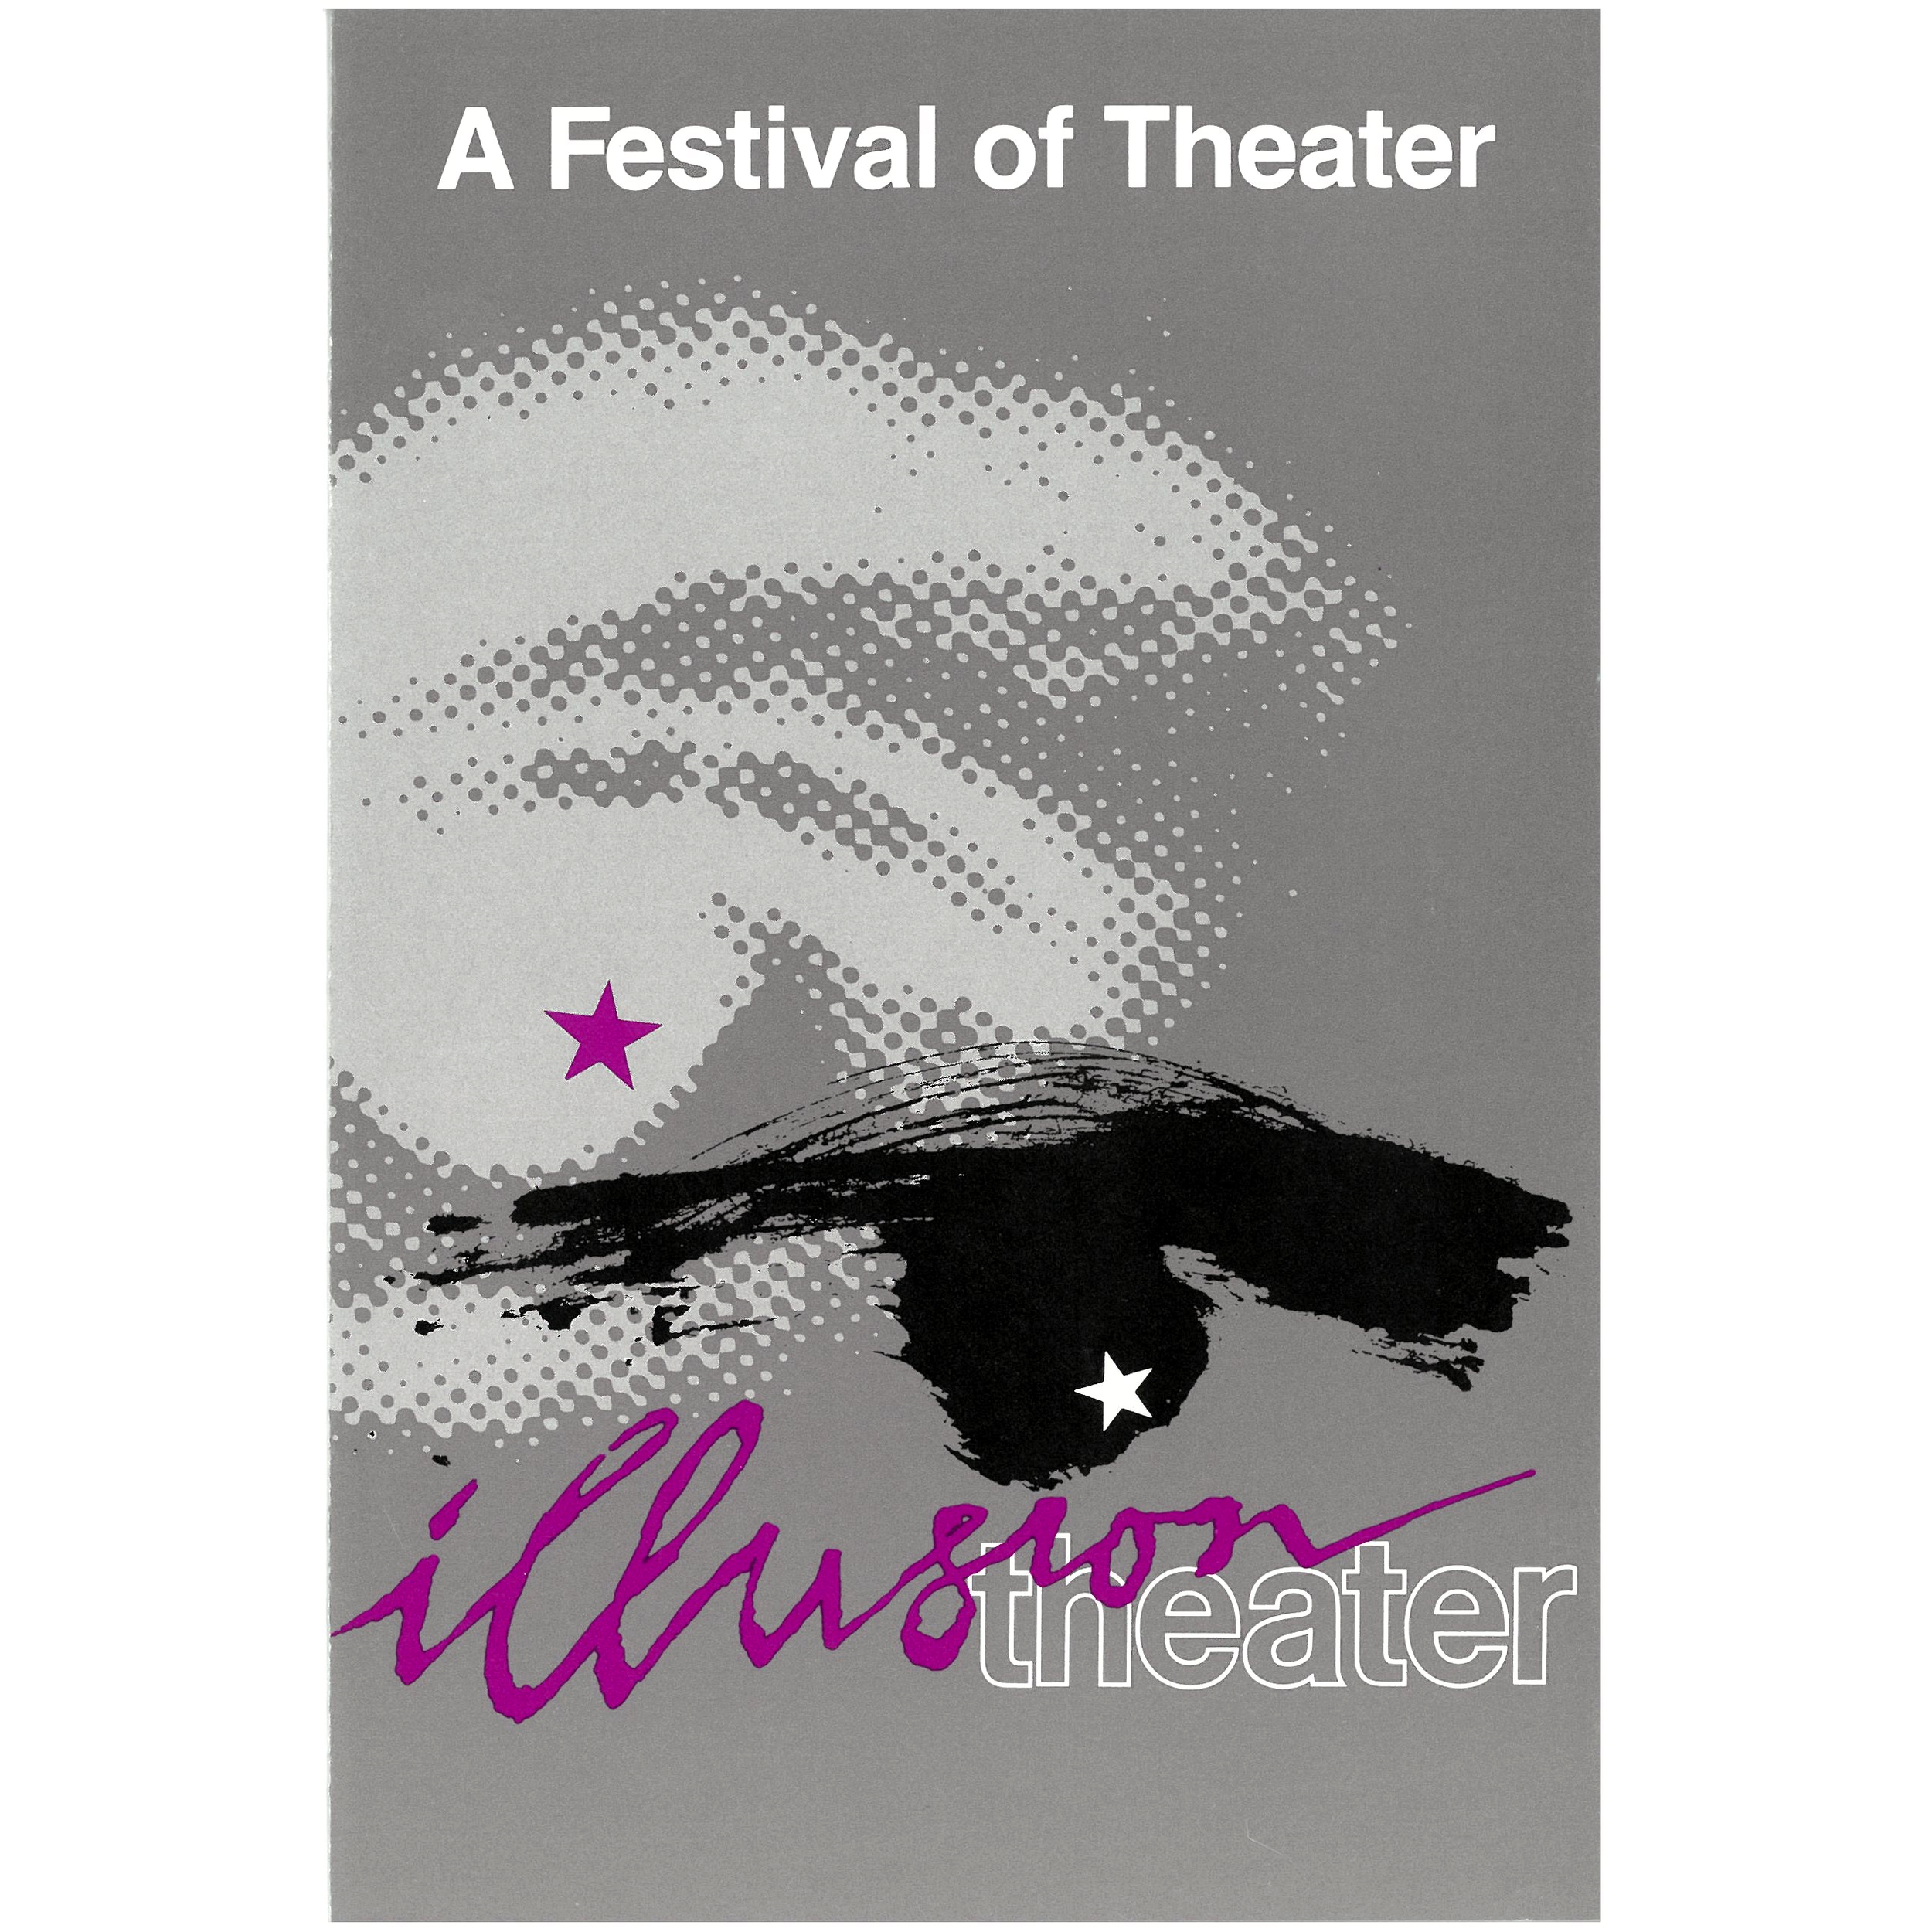 1983 - A Festival of Theater